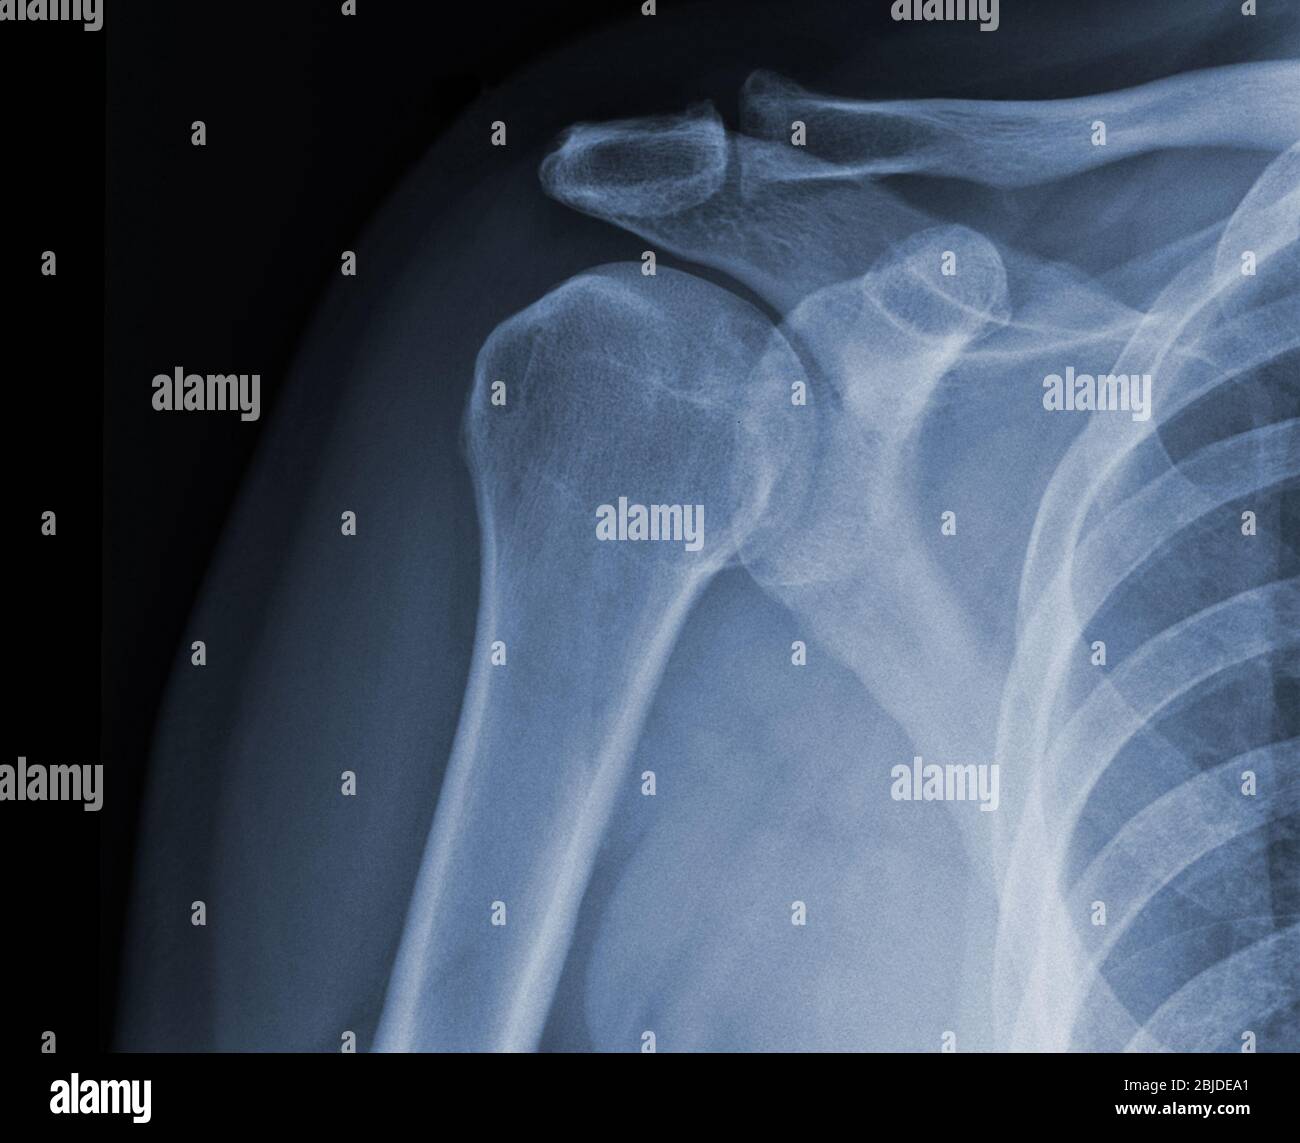 X-ray shoulder radiograph show state of injury Stock Photo